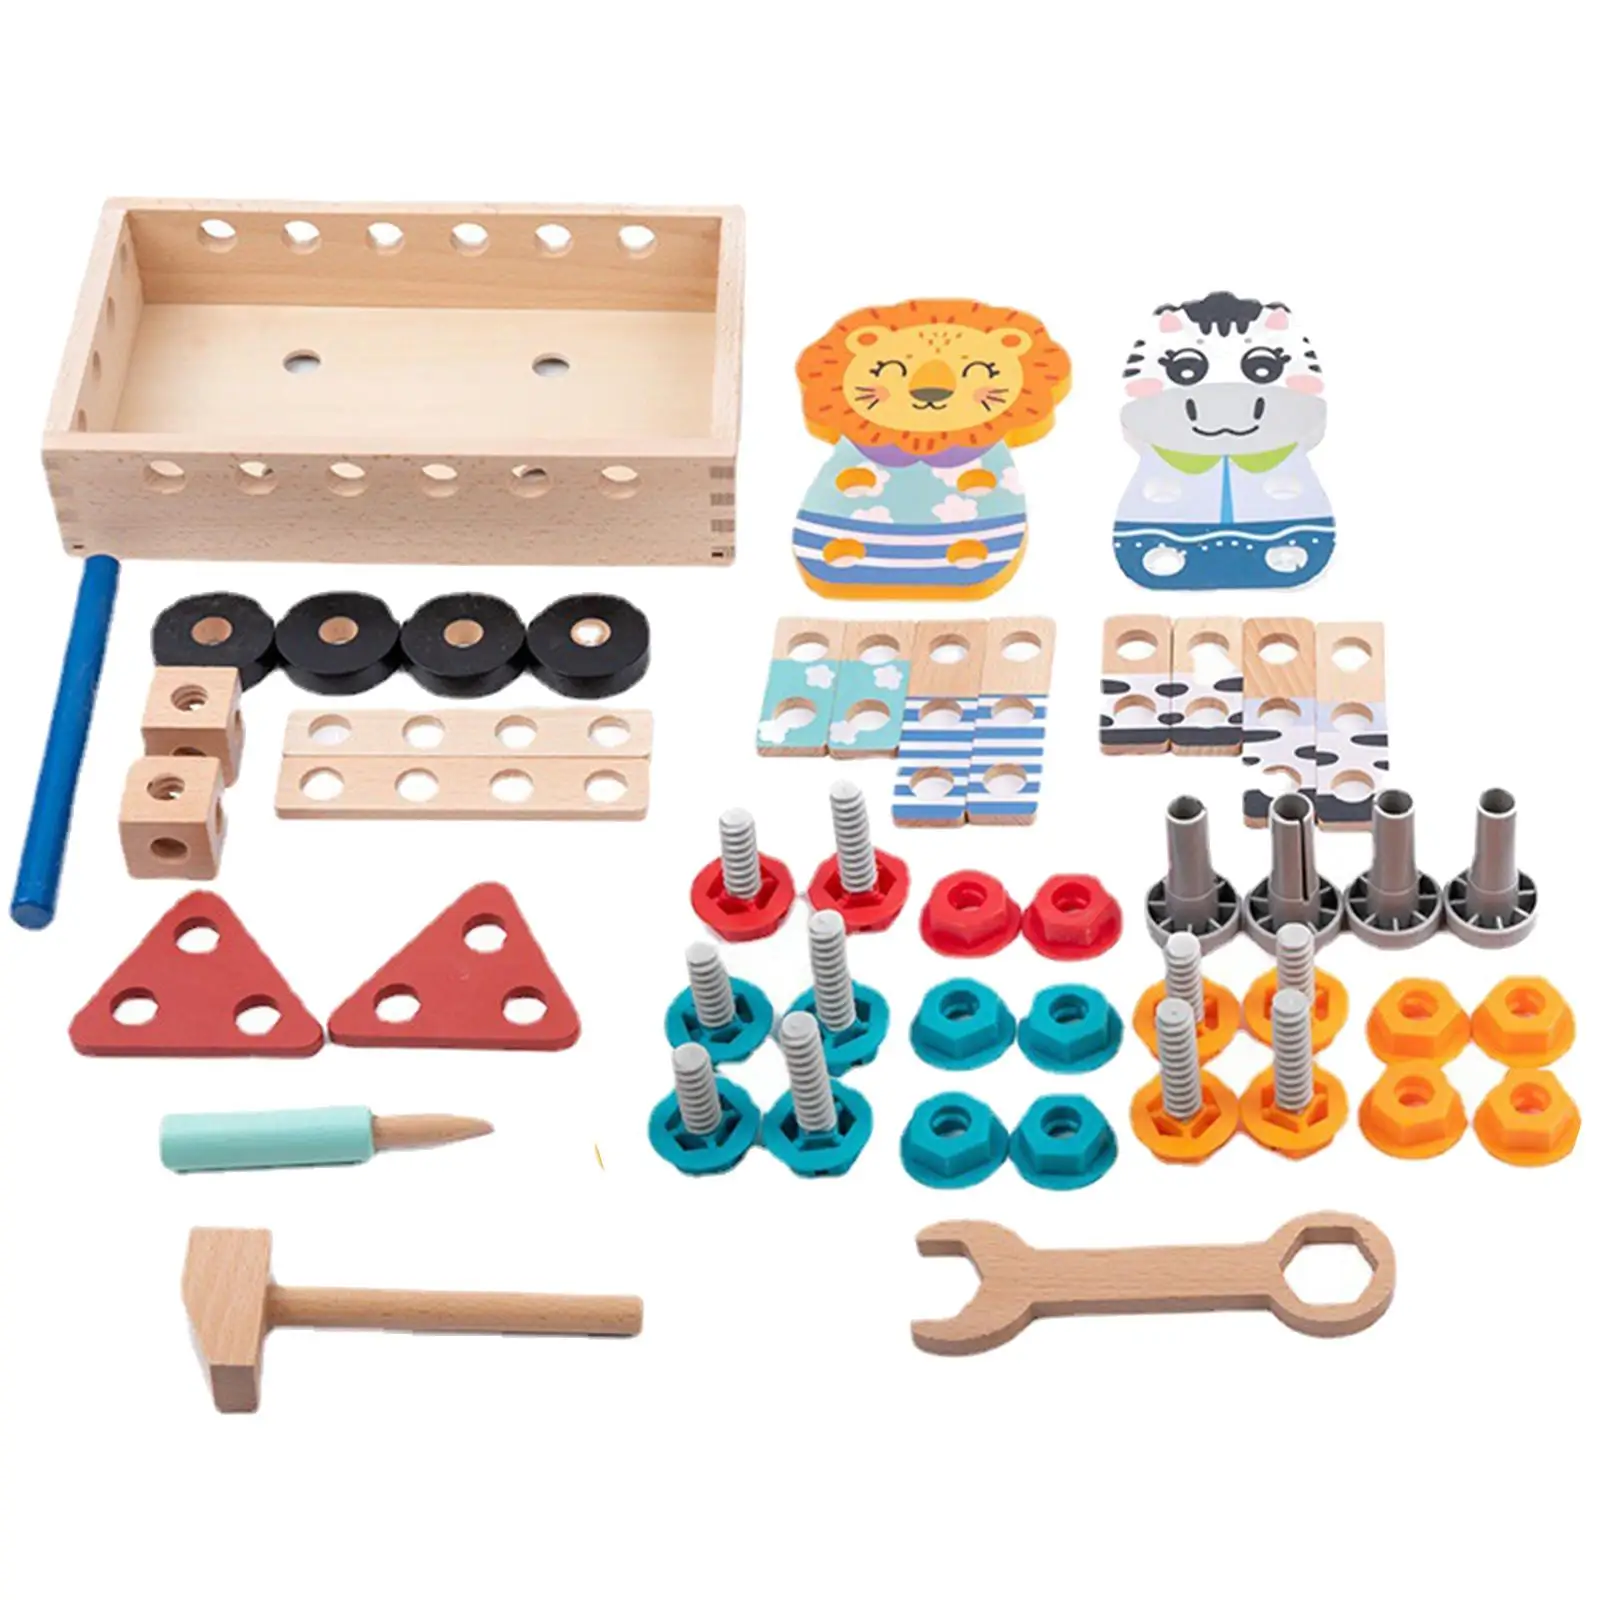 Construction Building Toy Toddler Tool Set for Preschool Role education